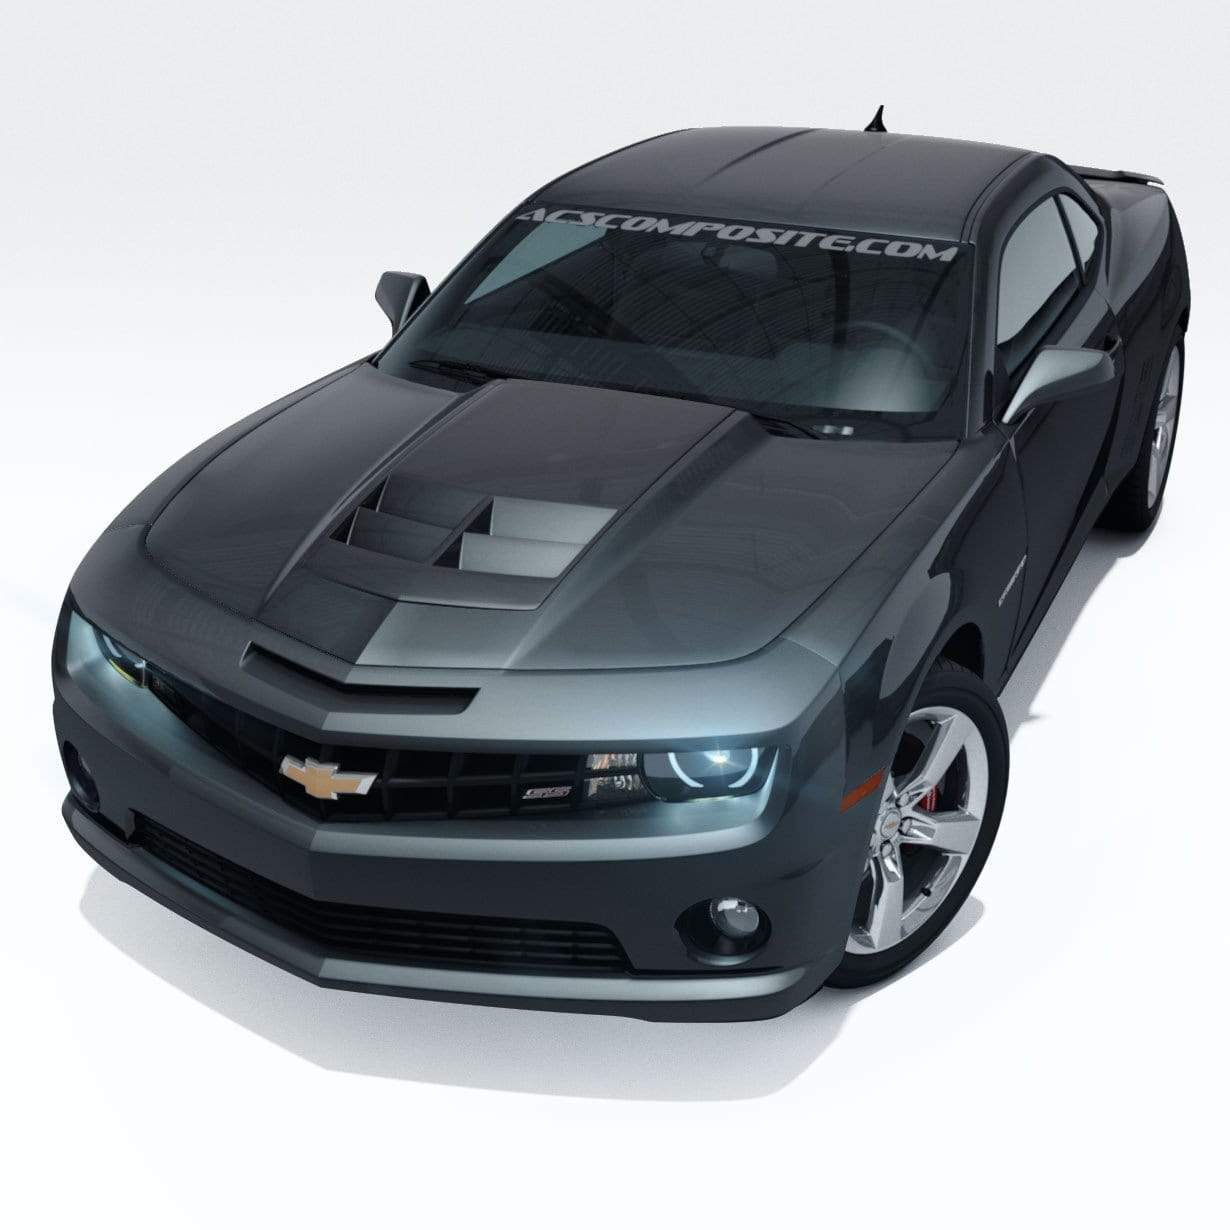 ACS Composite TL1 Hood Insert Kit for Camaro SS, RS, LT - SKU 33-4-095 - Upgrade Your Stock Hood with Improved Performance and Style